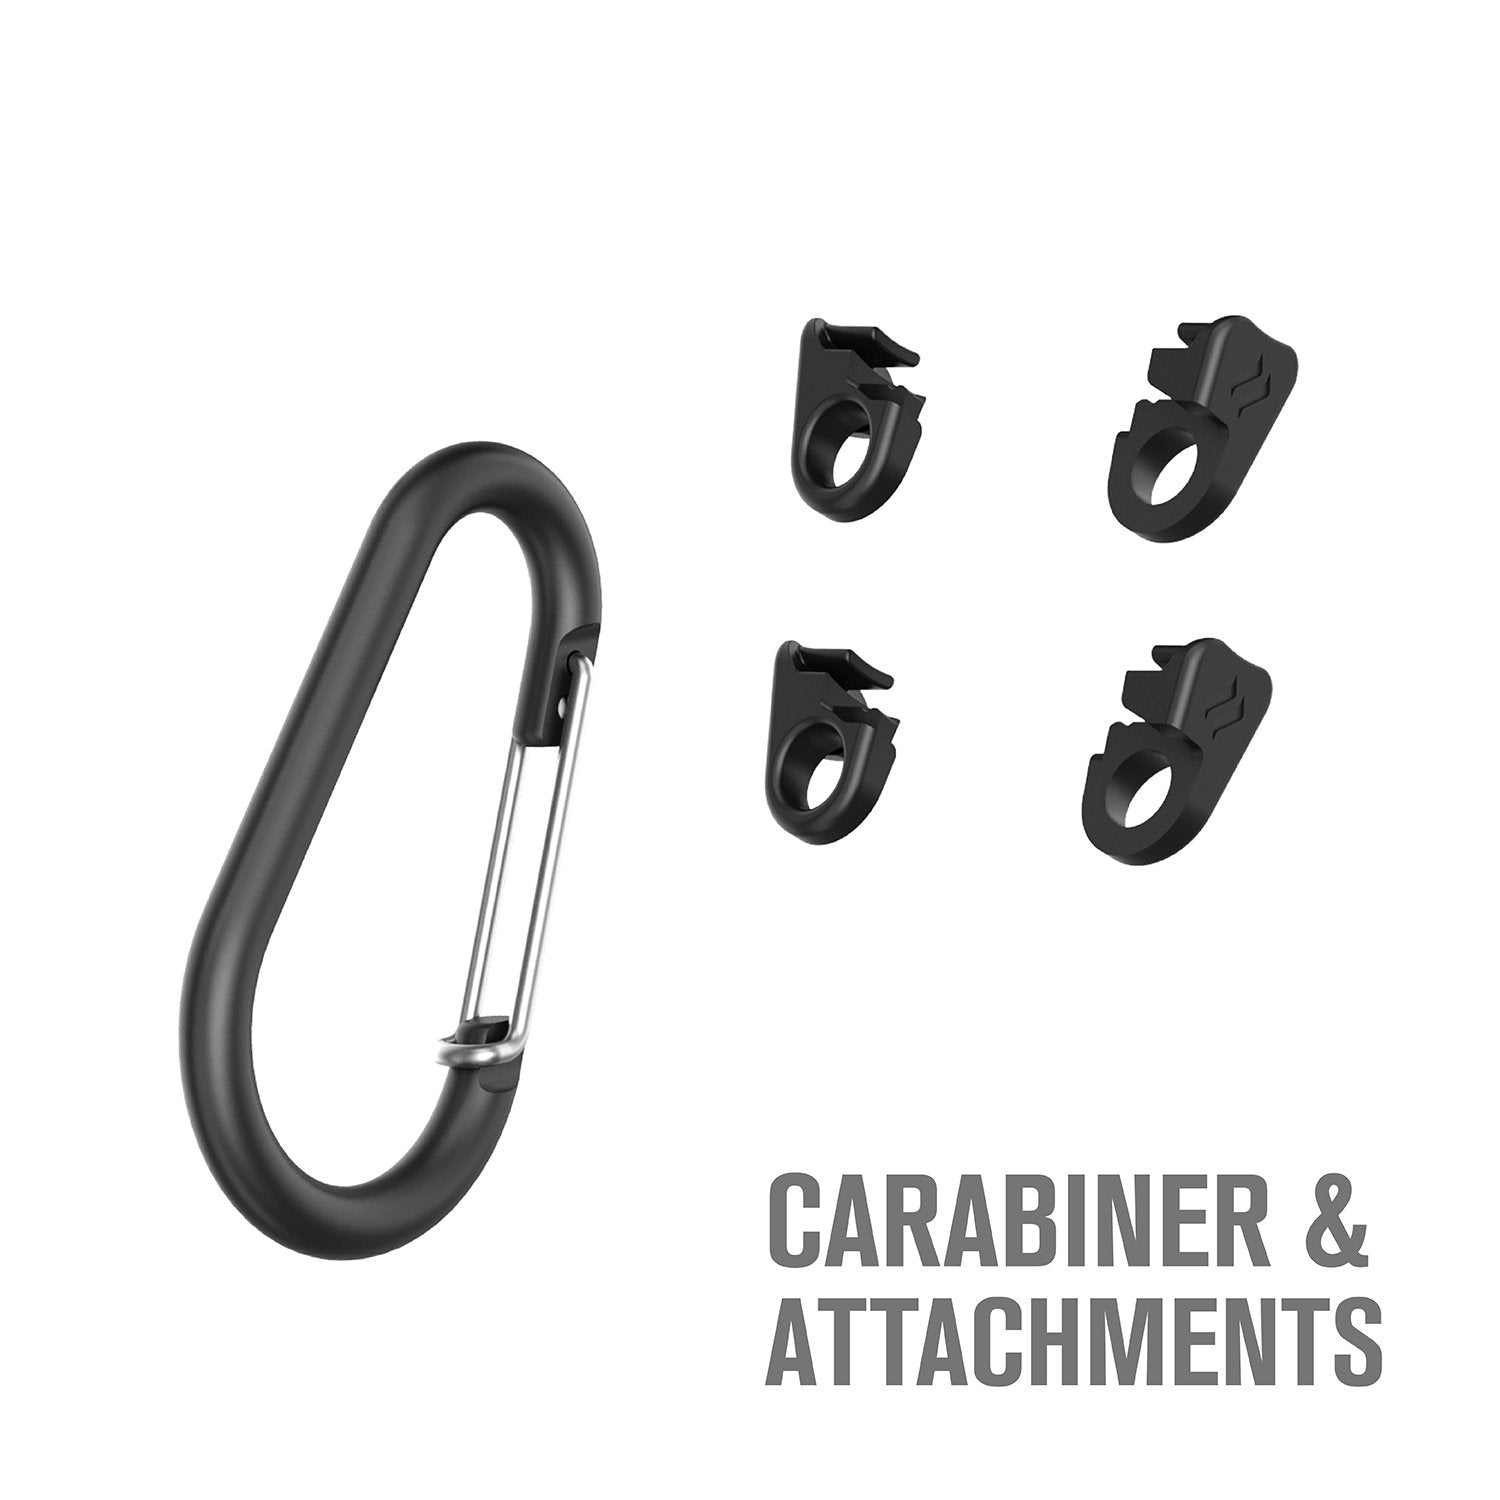 Catalyst carabiner attachment sample pictures Text reads carabiner and attachments